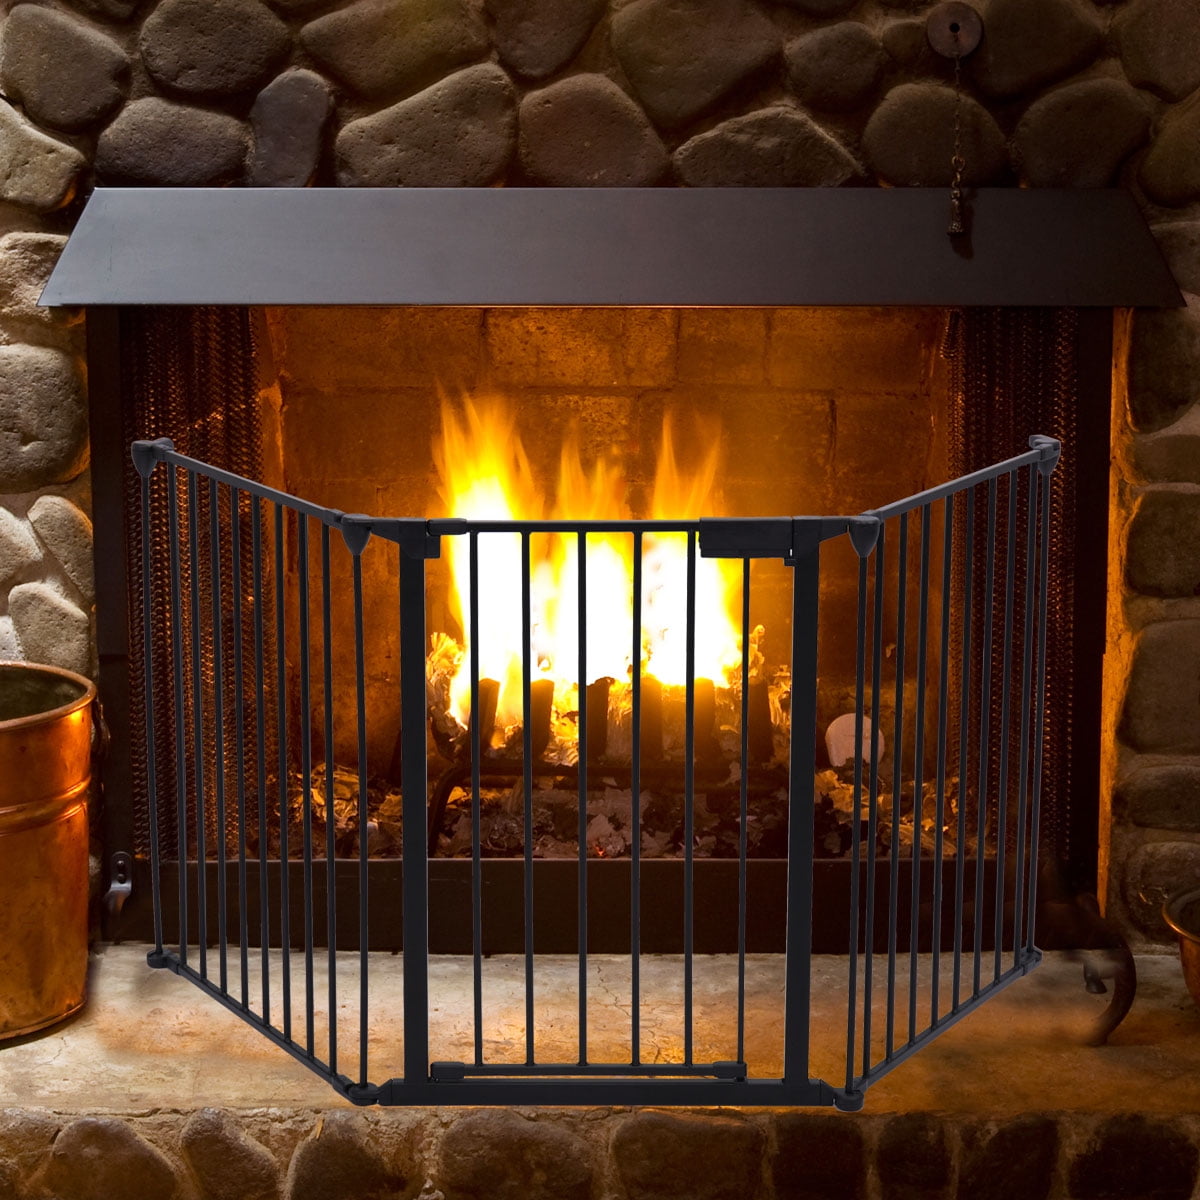 Fireplace Safety Baby Gates, Screens & Bumper Guards in Houston TX